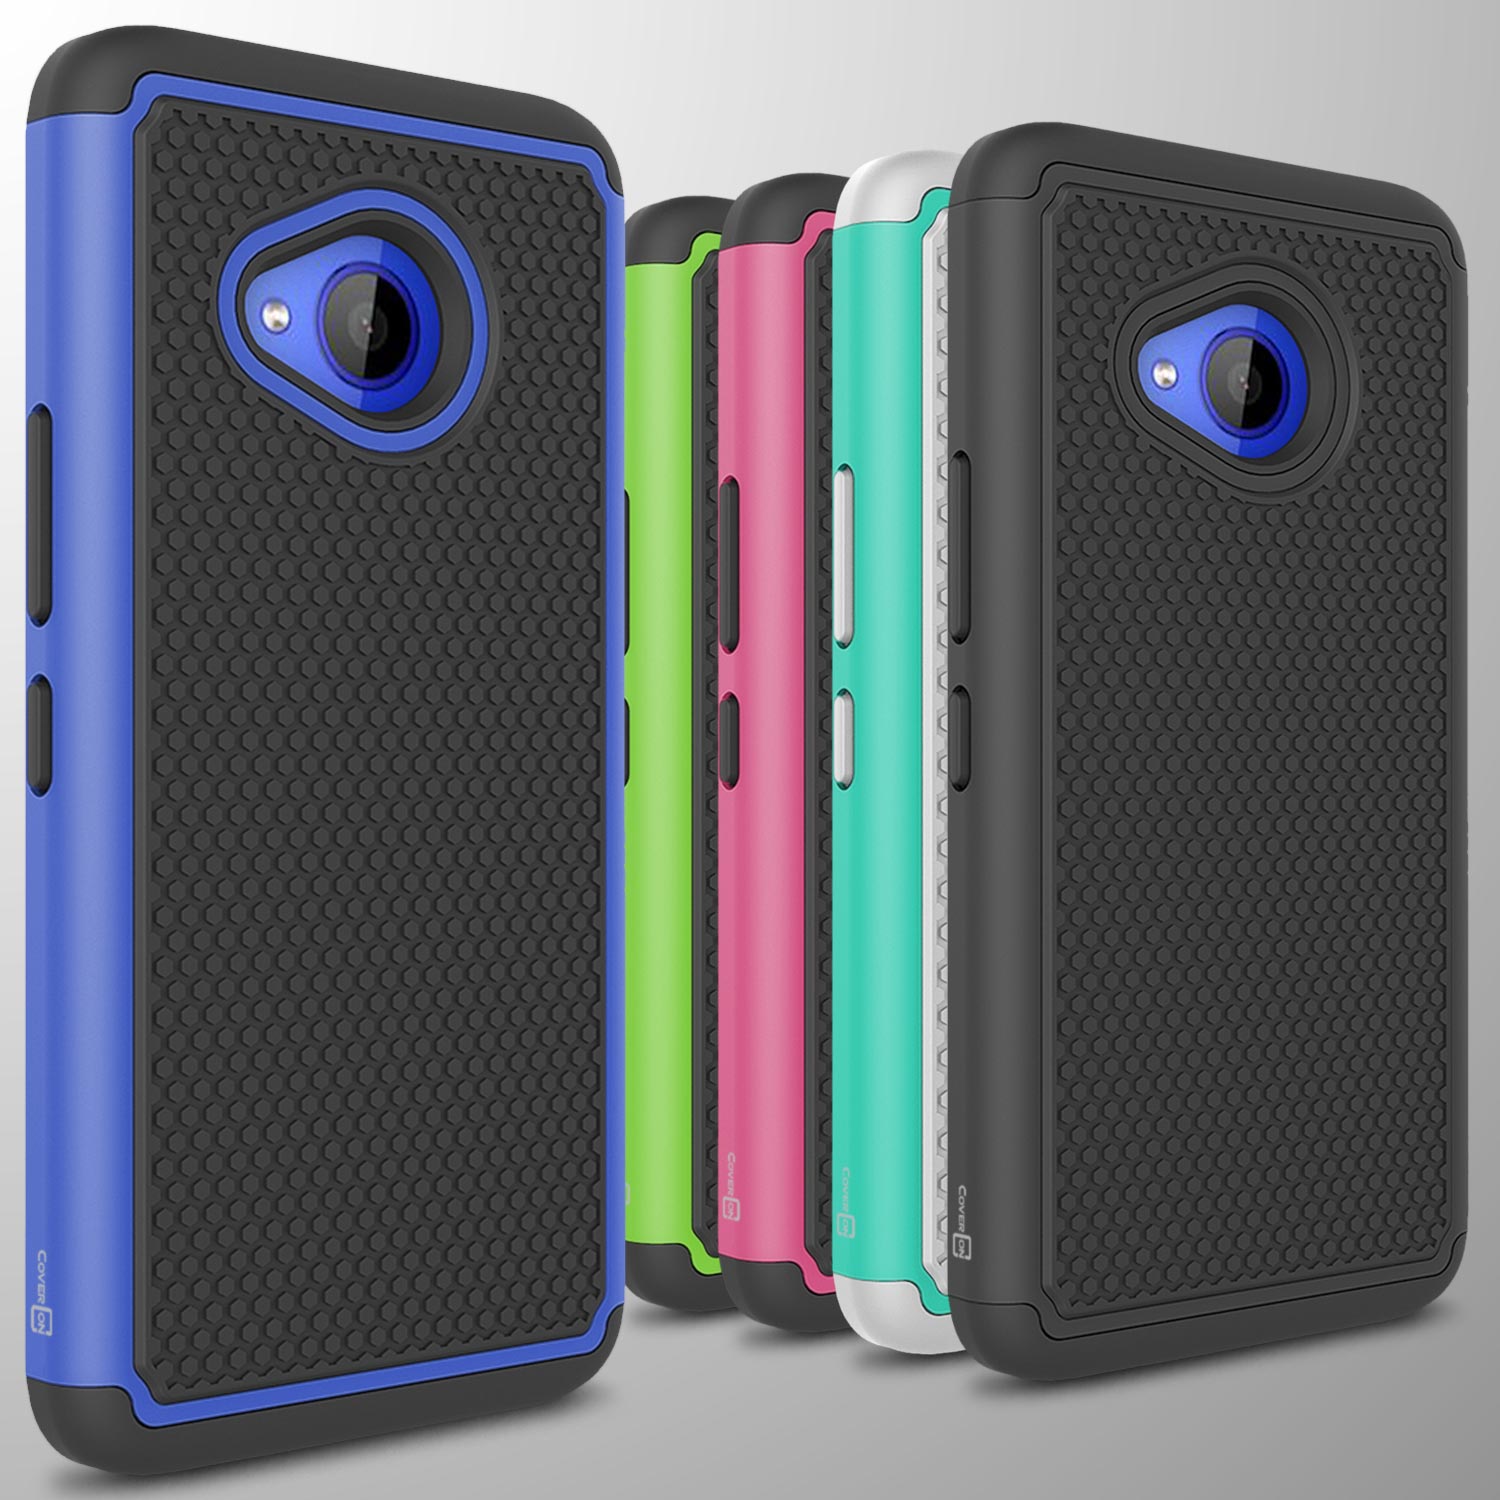 For Htc U11 Life Case Tough Protective Hard Hybrid Phone Cover Ebay